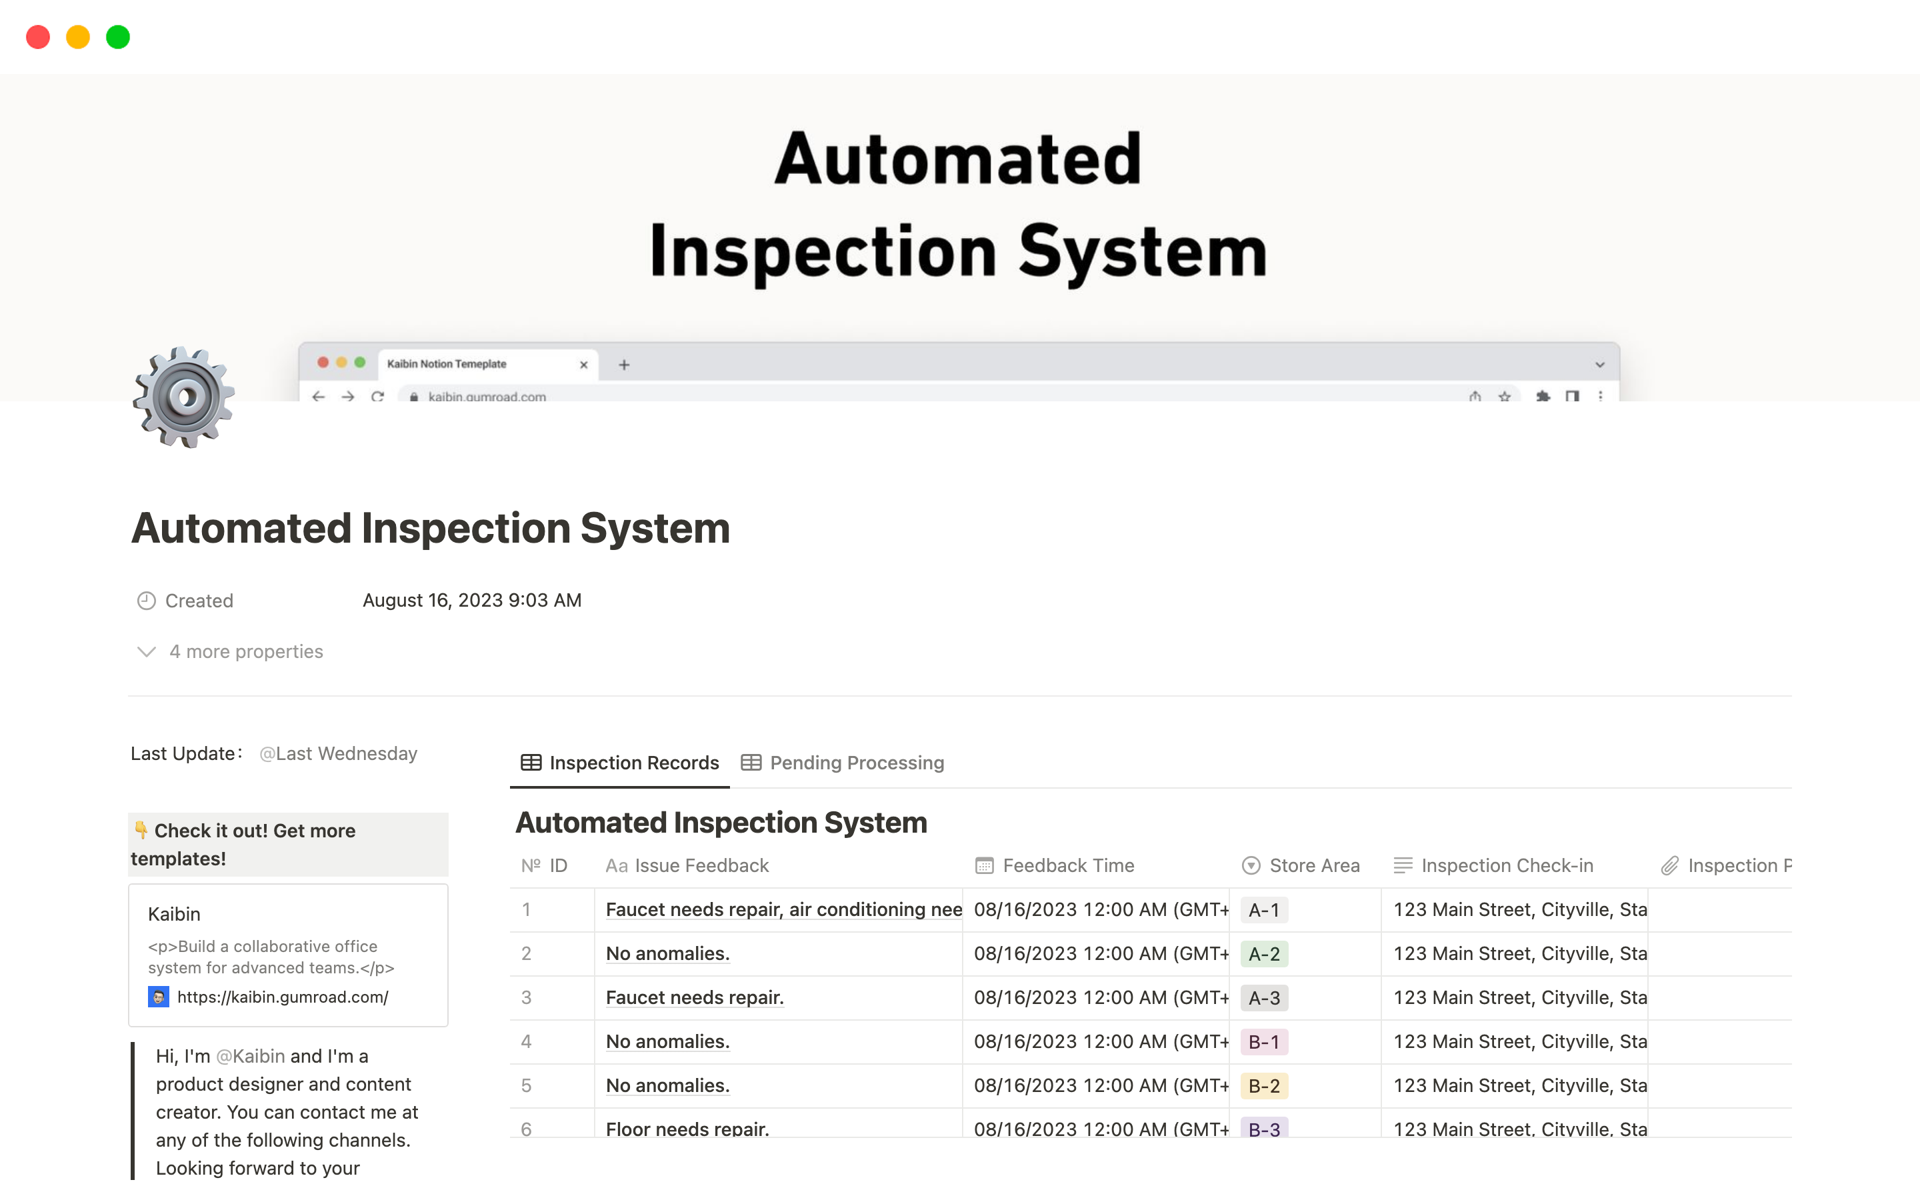 This system assists inspection personnel in recording inspection results both inside and outside buildings. It typically involves checking equipment, facilities, products, or processes. 